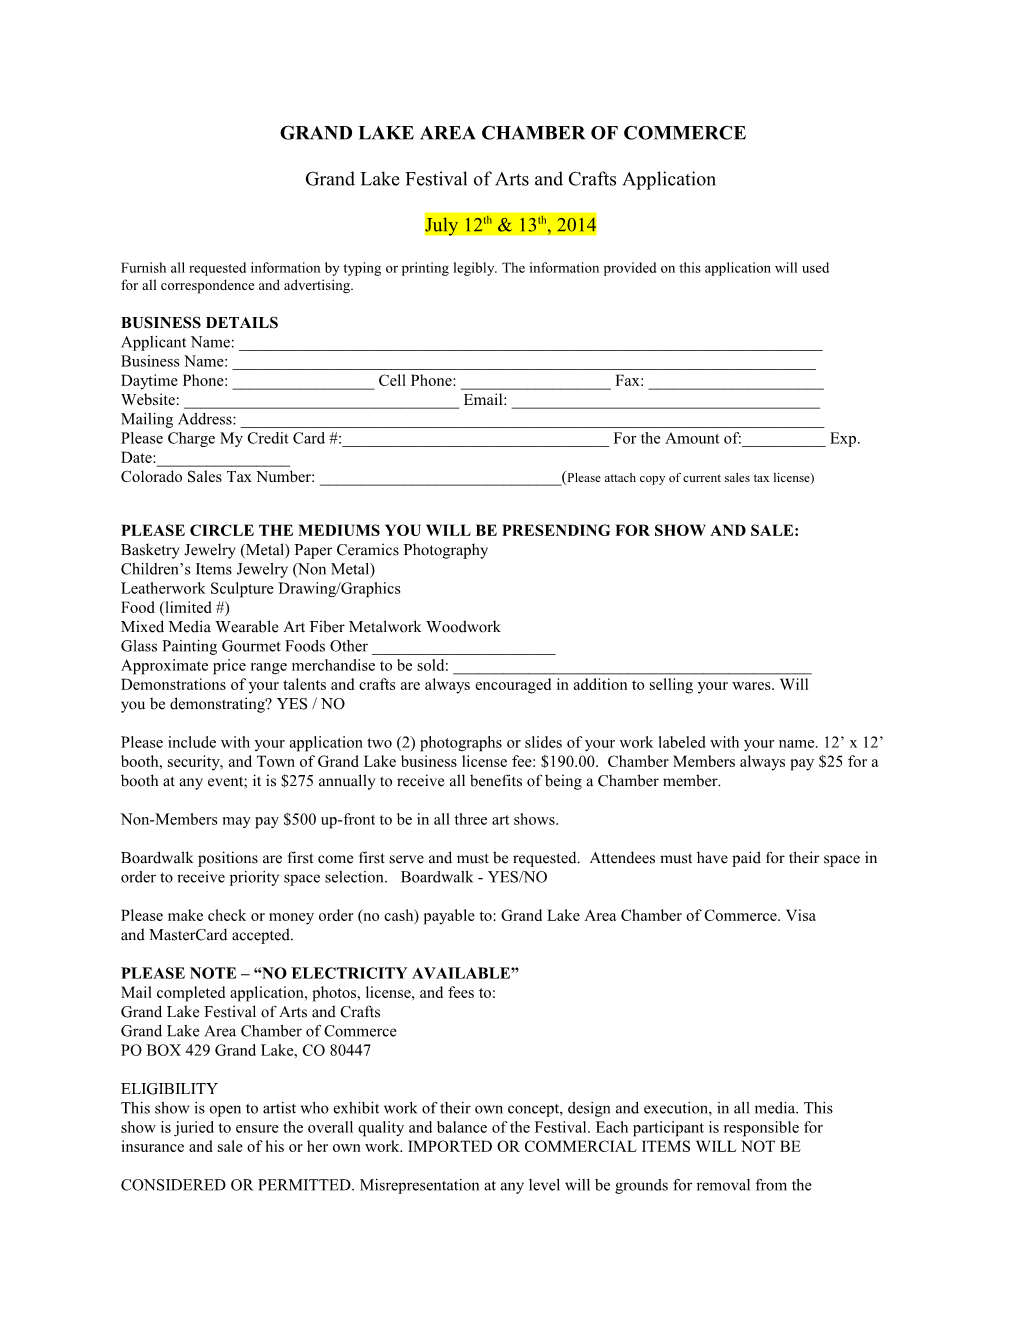 Grand Lake Festival of Arts and Crafts Application